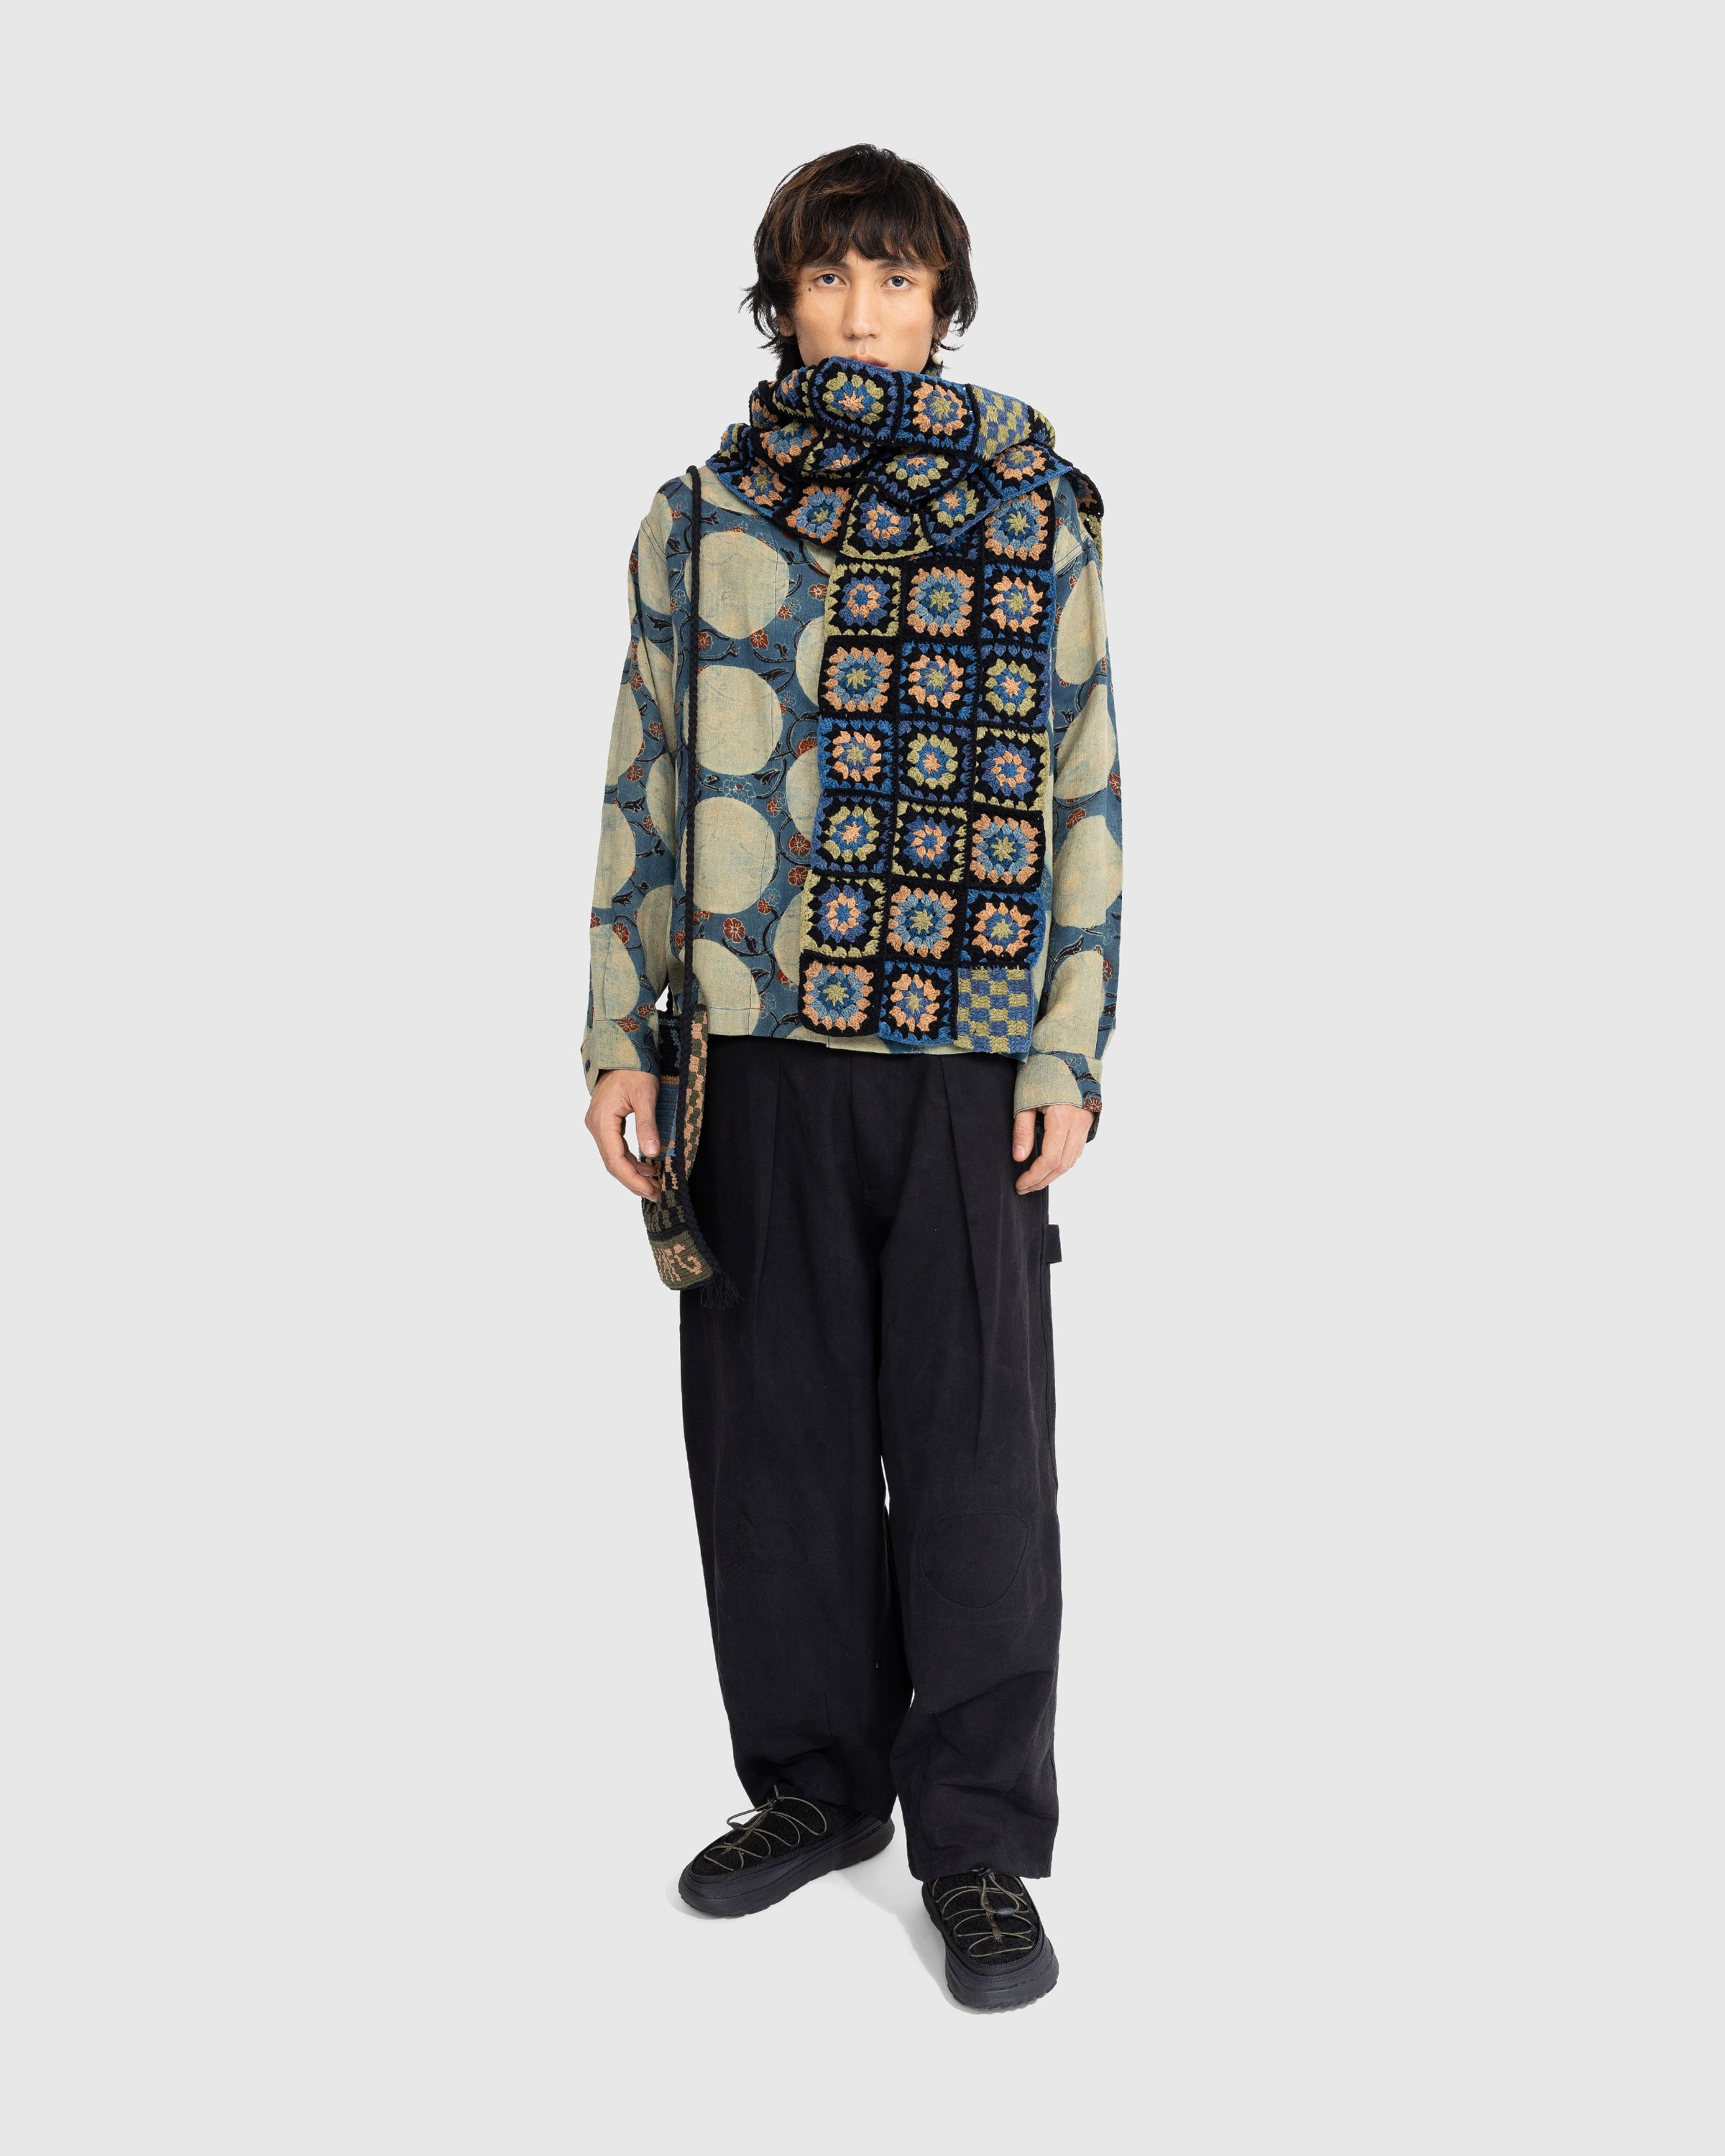 Story mfg. - Piece Scarf Slim Multi - Accessories - undefined - Image 4